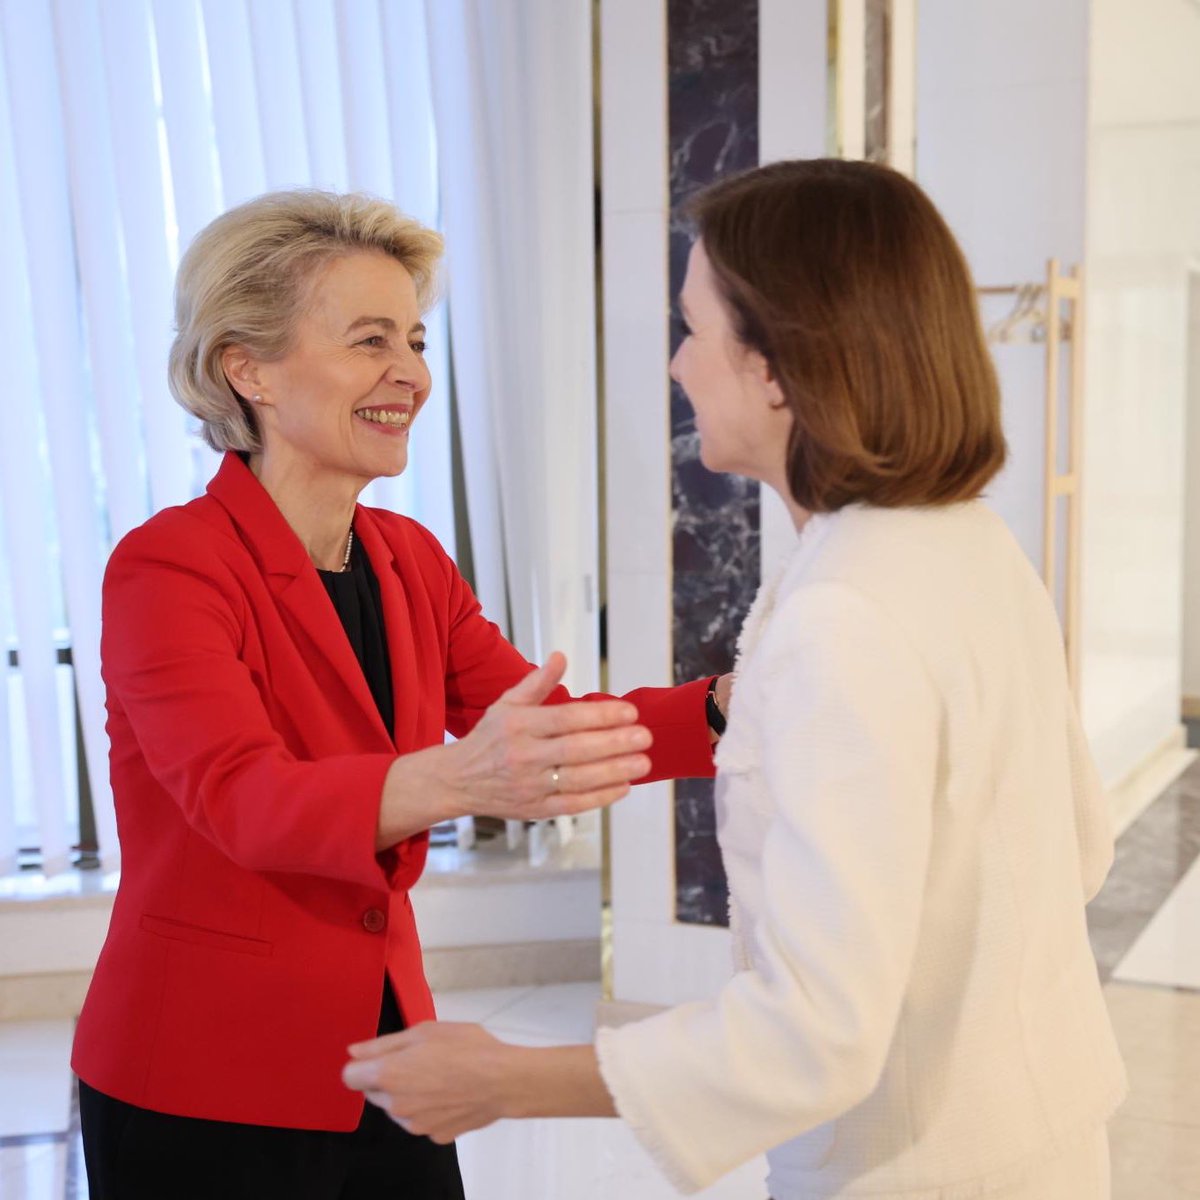 Ursula von der Leyen at meeting with Maia Sandy: I am glad to announce that we will provide an additional:  €200 million for your energy security ; €50 million in budgetary support  And we will help mobilise other international donors